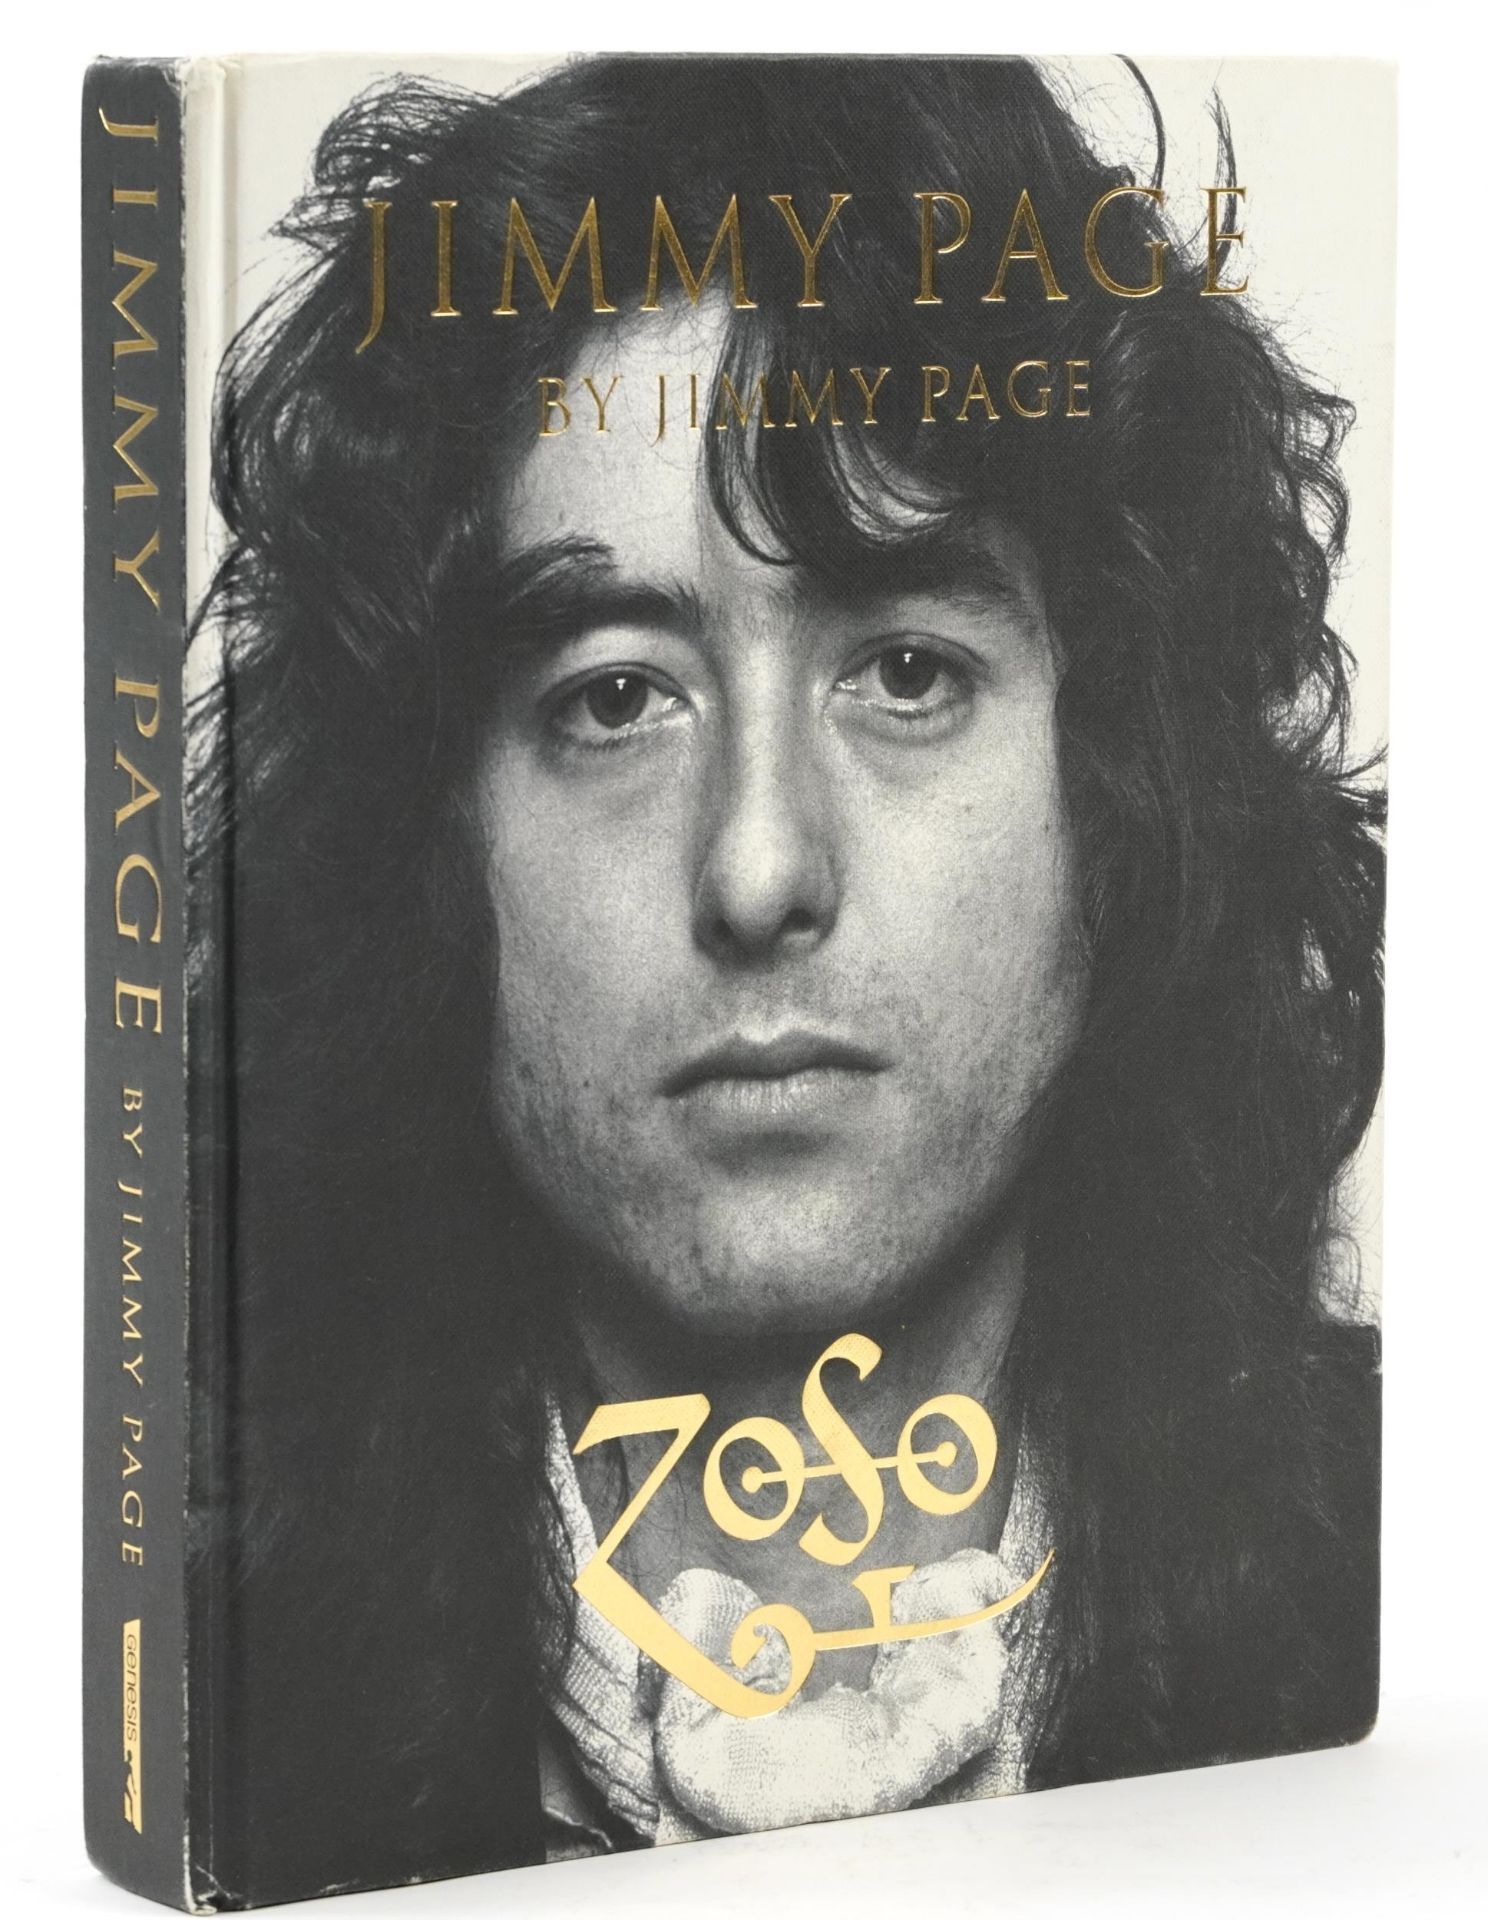 Jimmy Page by Jimmy Page, hardback book signed by Jimmy Page and inscribed Cole really good - Image 2 of 4